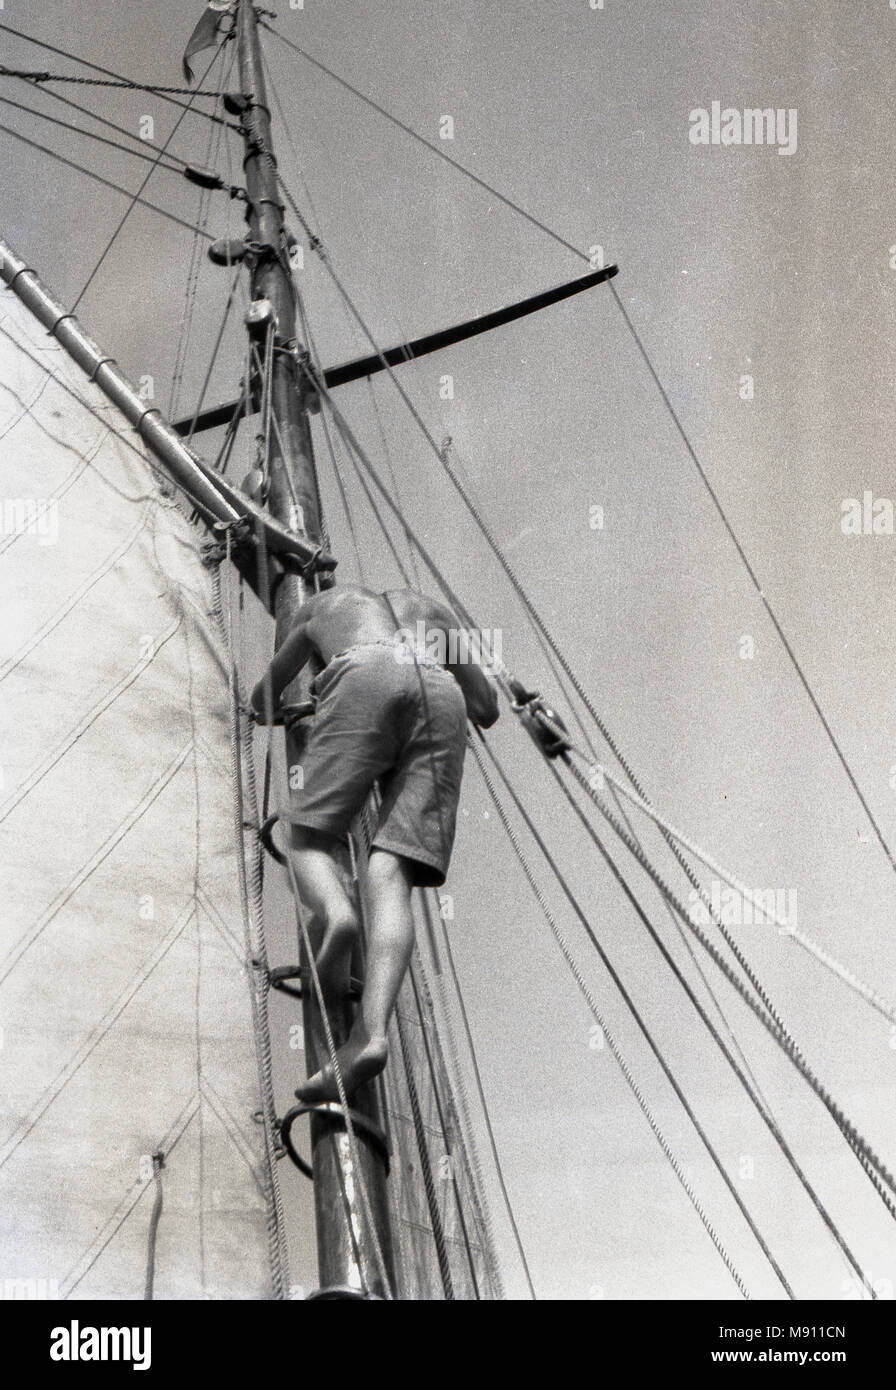 1970s, sailor climbing up or going aloft a mast on a boat on his own unaided,  England, UK. Stock Photo